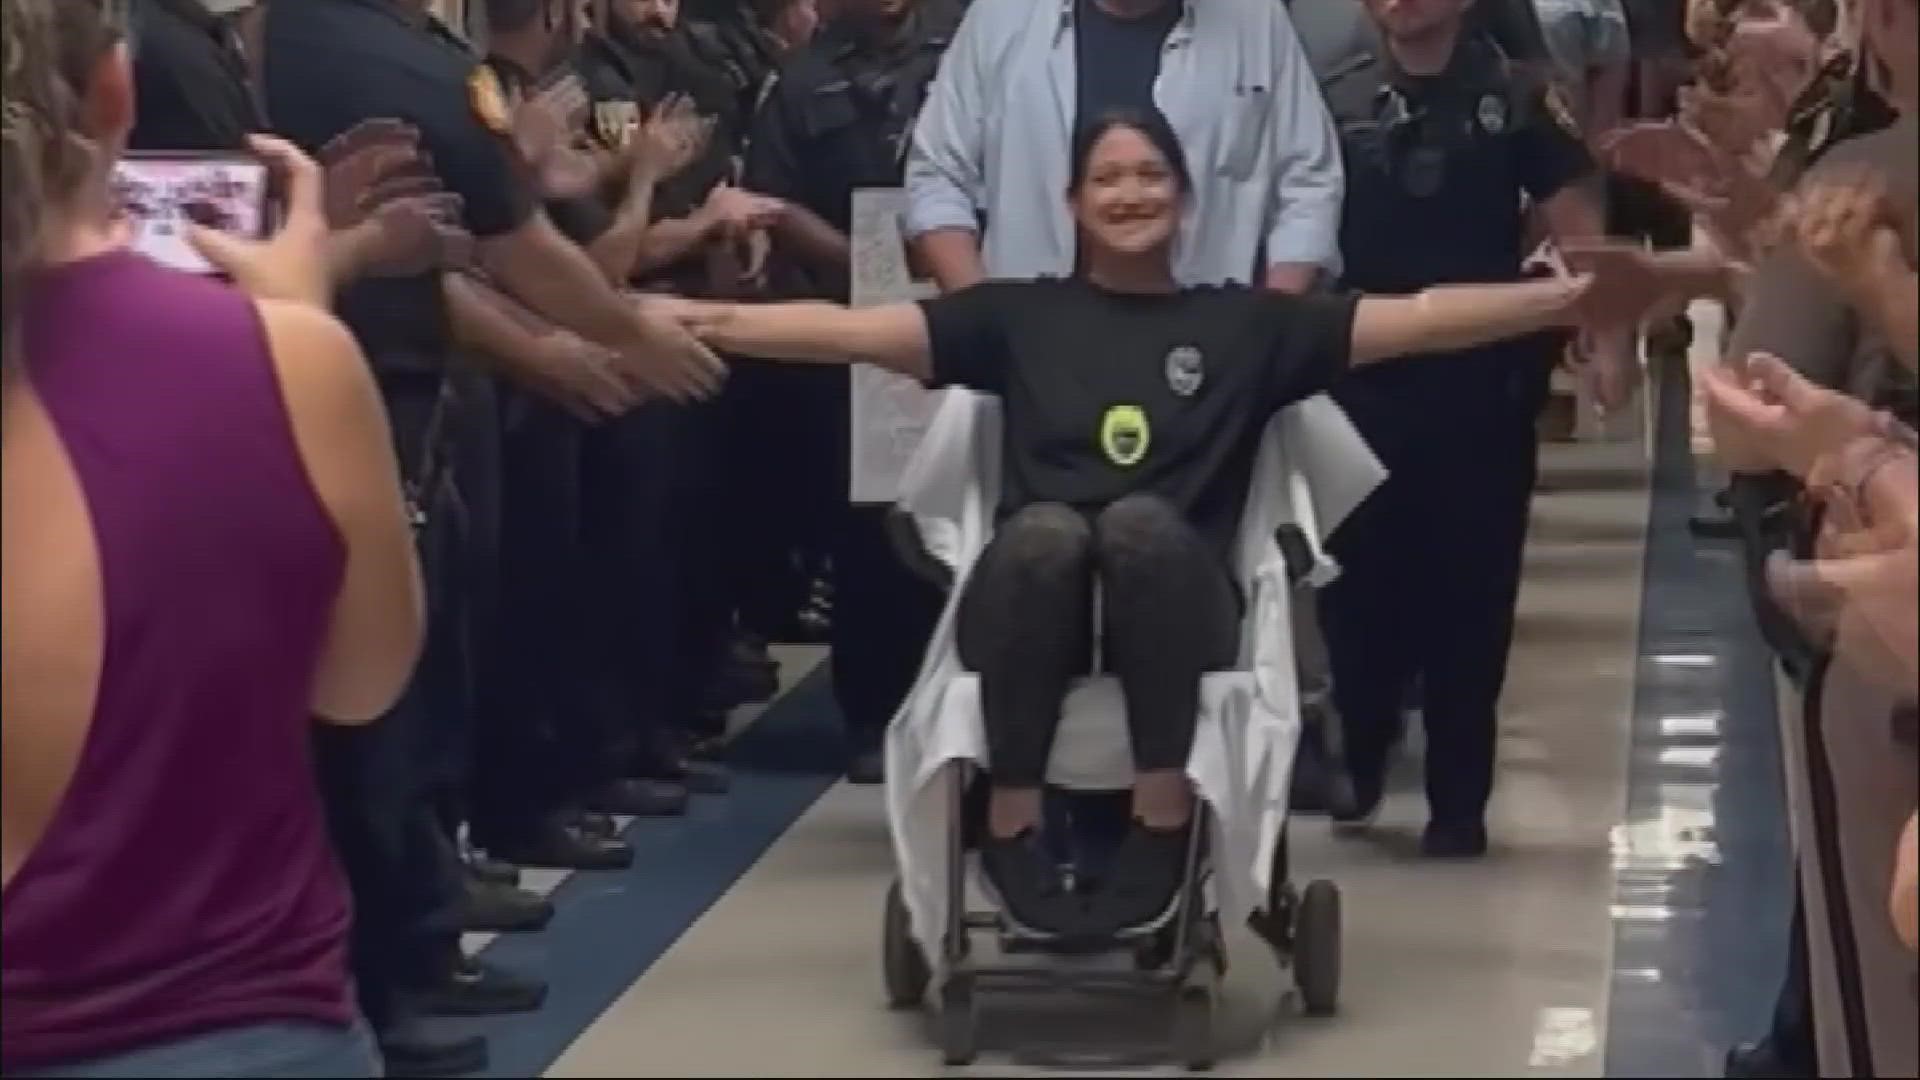 'This hero goes home to begin her long road to recovery," posted the Fraternal Order of Police in Jacksonville on Facebook.